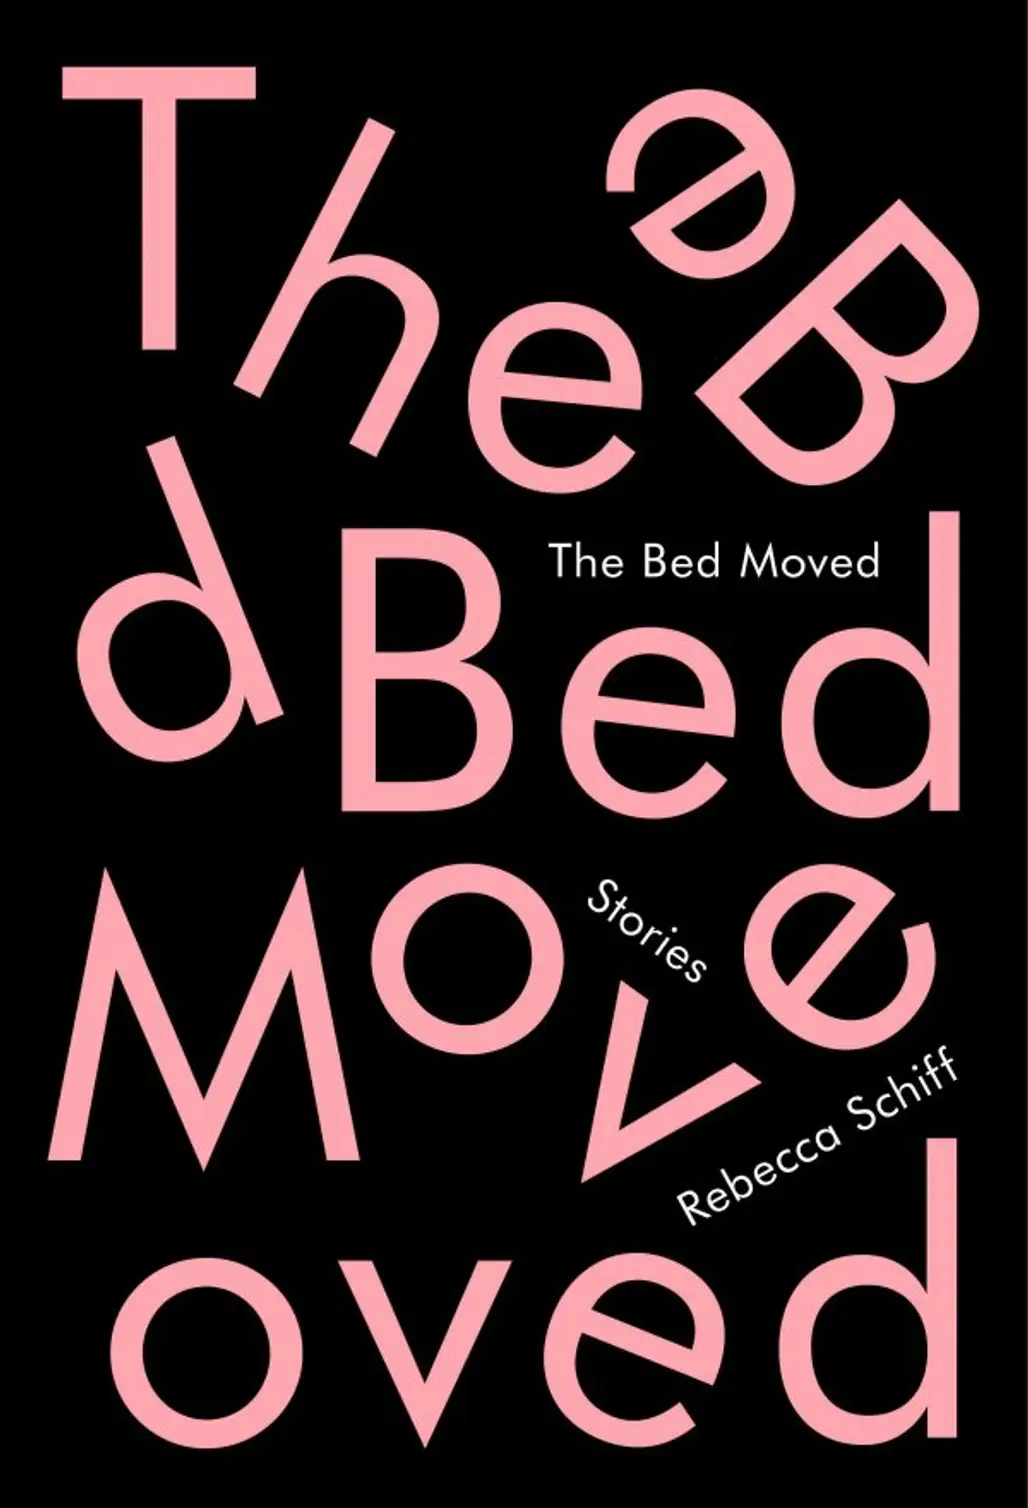 The Bed Moved by Rebecca Schiff